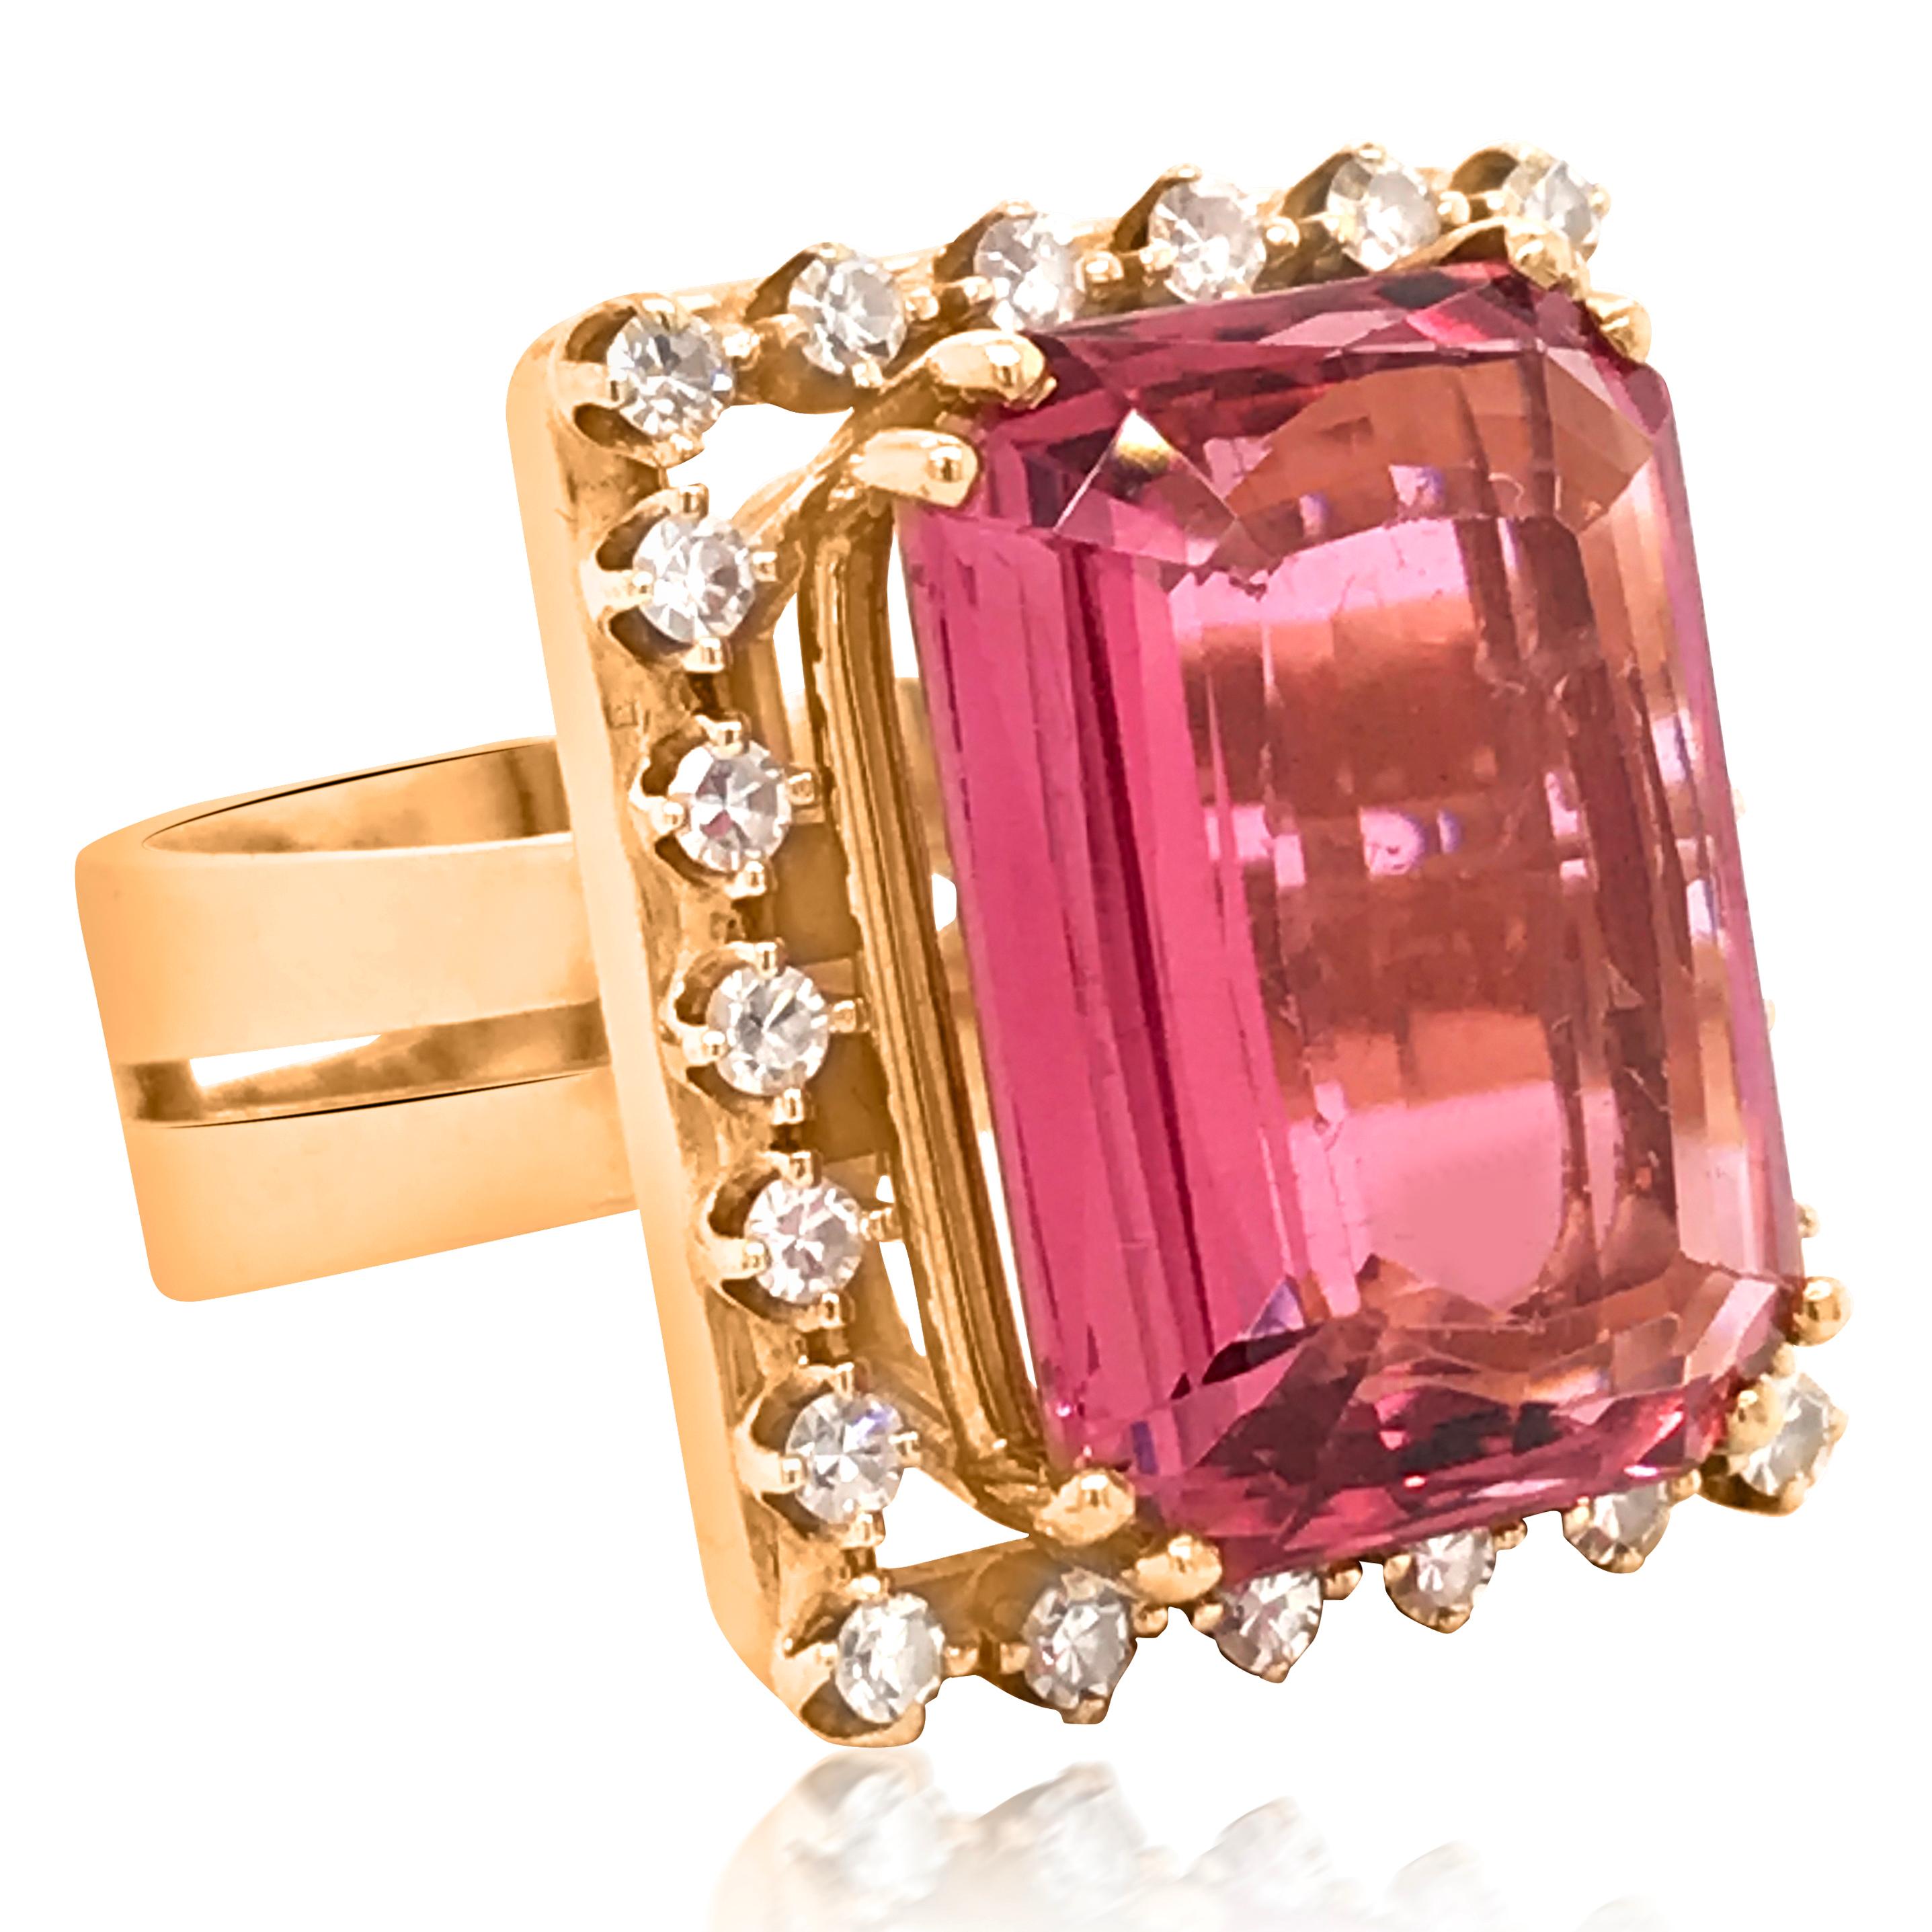 This irresistible pink tourmaline ring is designed by PAASH crafted in 18K yellow gold. It is centered with a cushion-cut genuine pink tourmaline measuring 17.40 x 12.70 x 6.65 mm and weighing approx 11.5ct. Surrounded by 22 prong-set round-cut